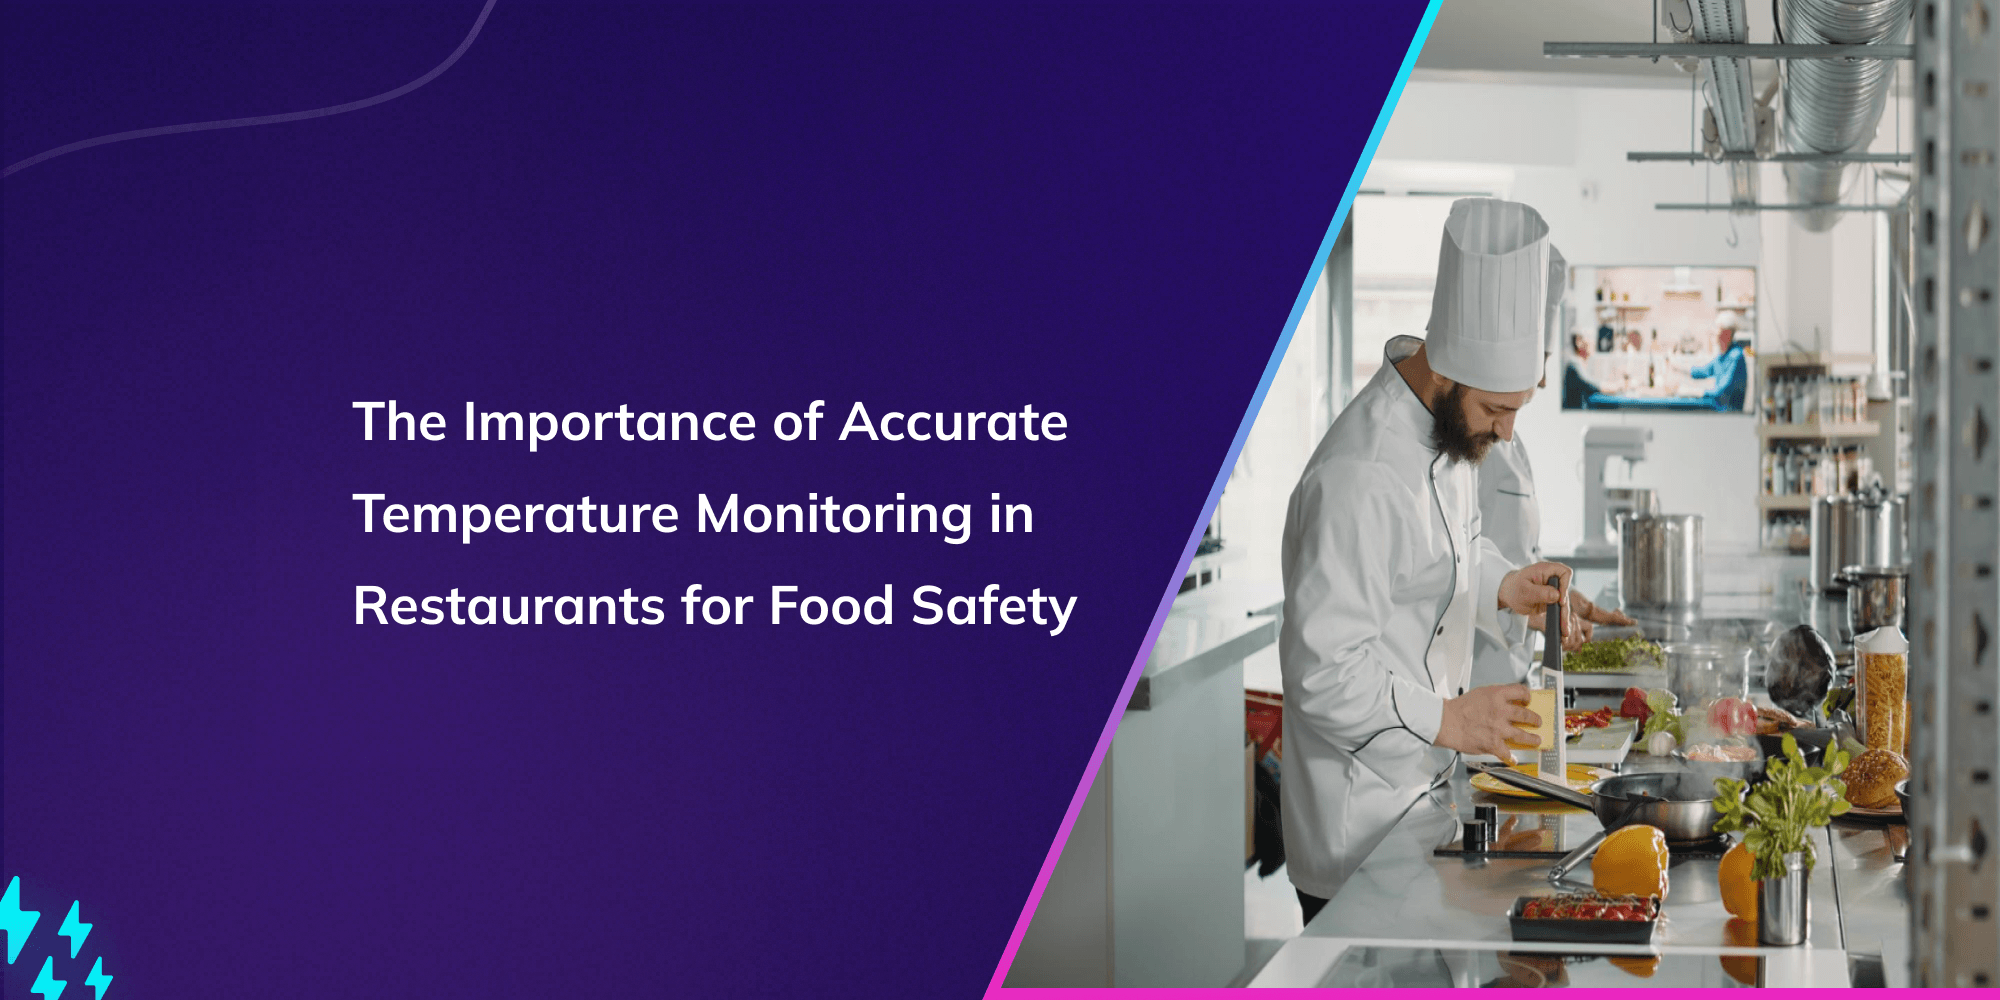 The Importance of Accurate Temperature Monitoring in Restaurants for Food Safety